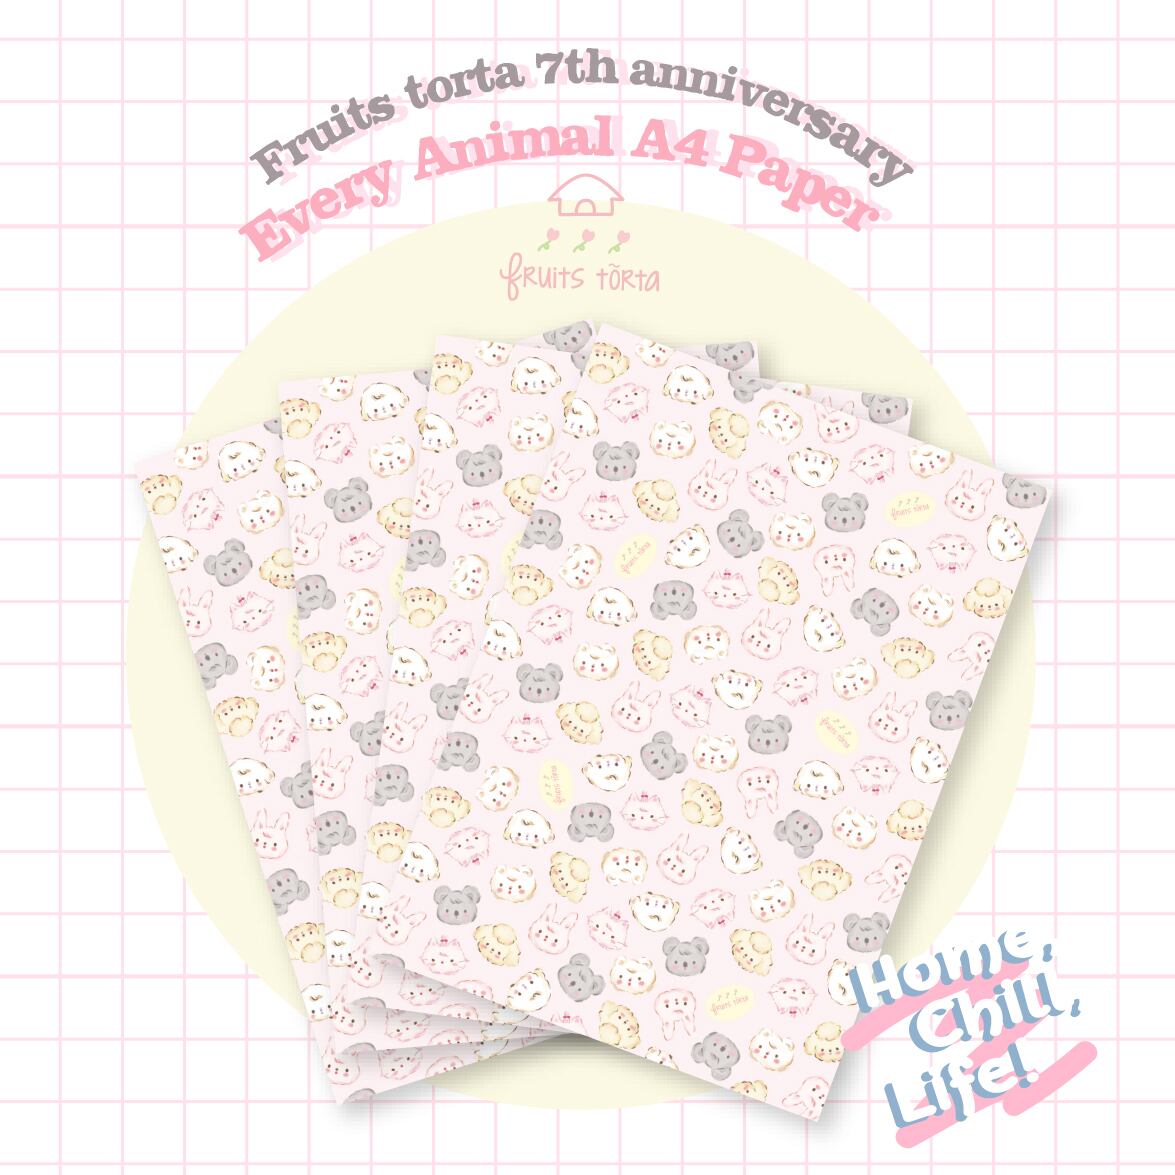 7th Anniversary Every Animal A4Paper 